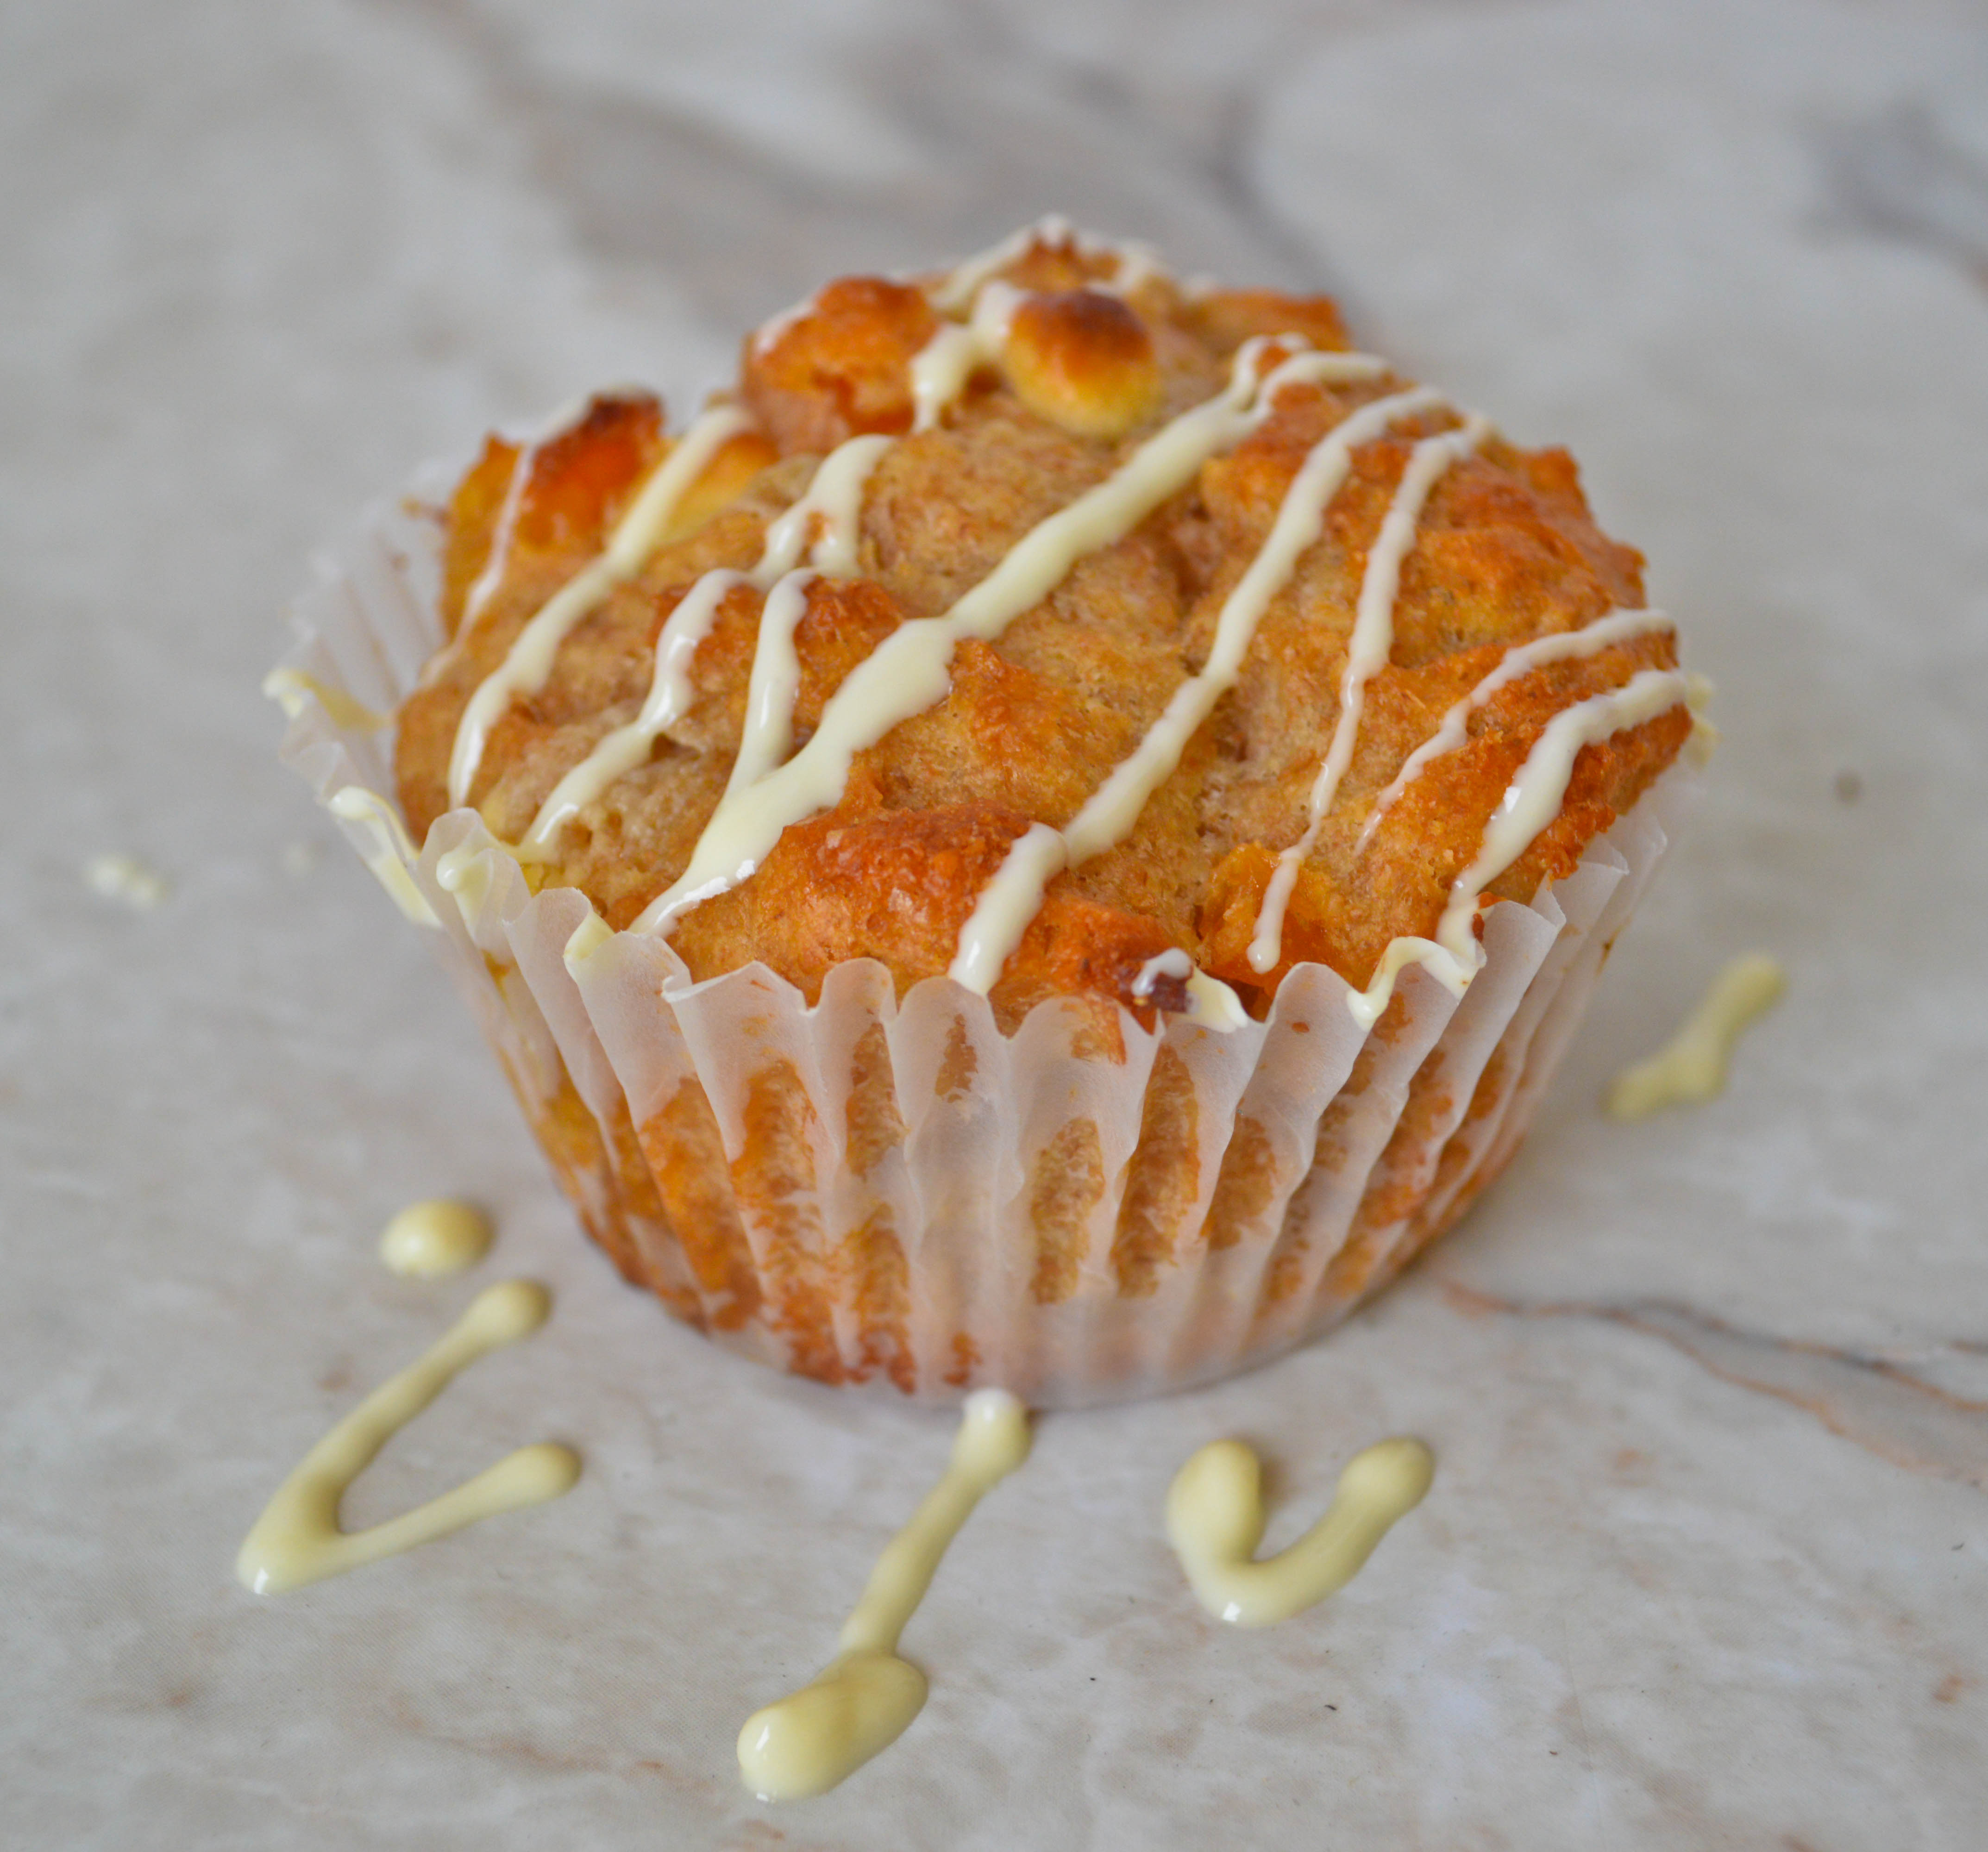 Healthy Breakfast Muffins with Apricot and White Chocolate - Confused Julia